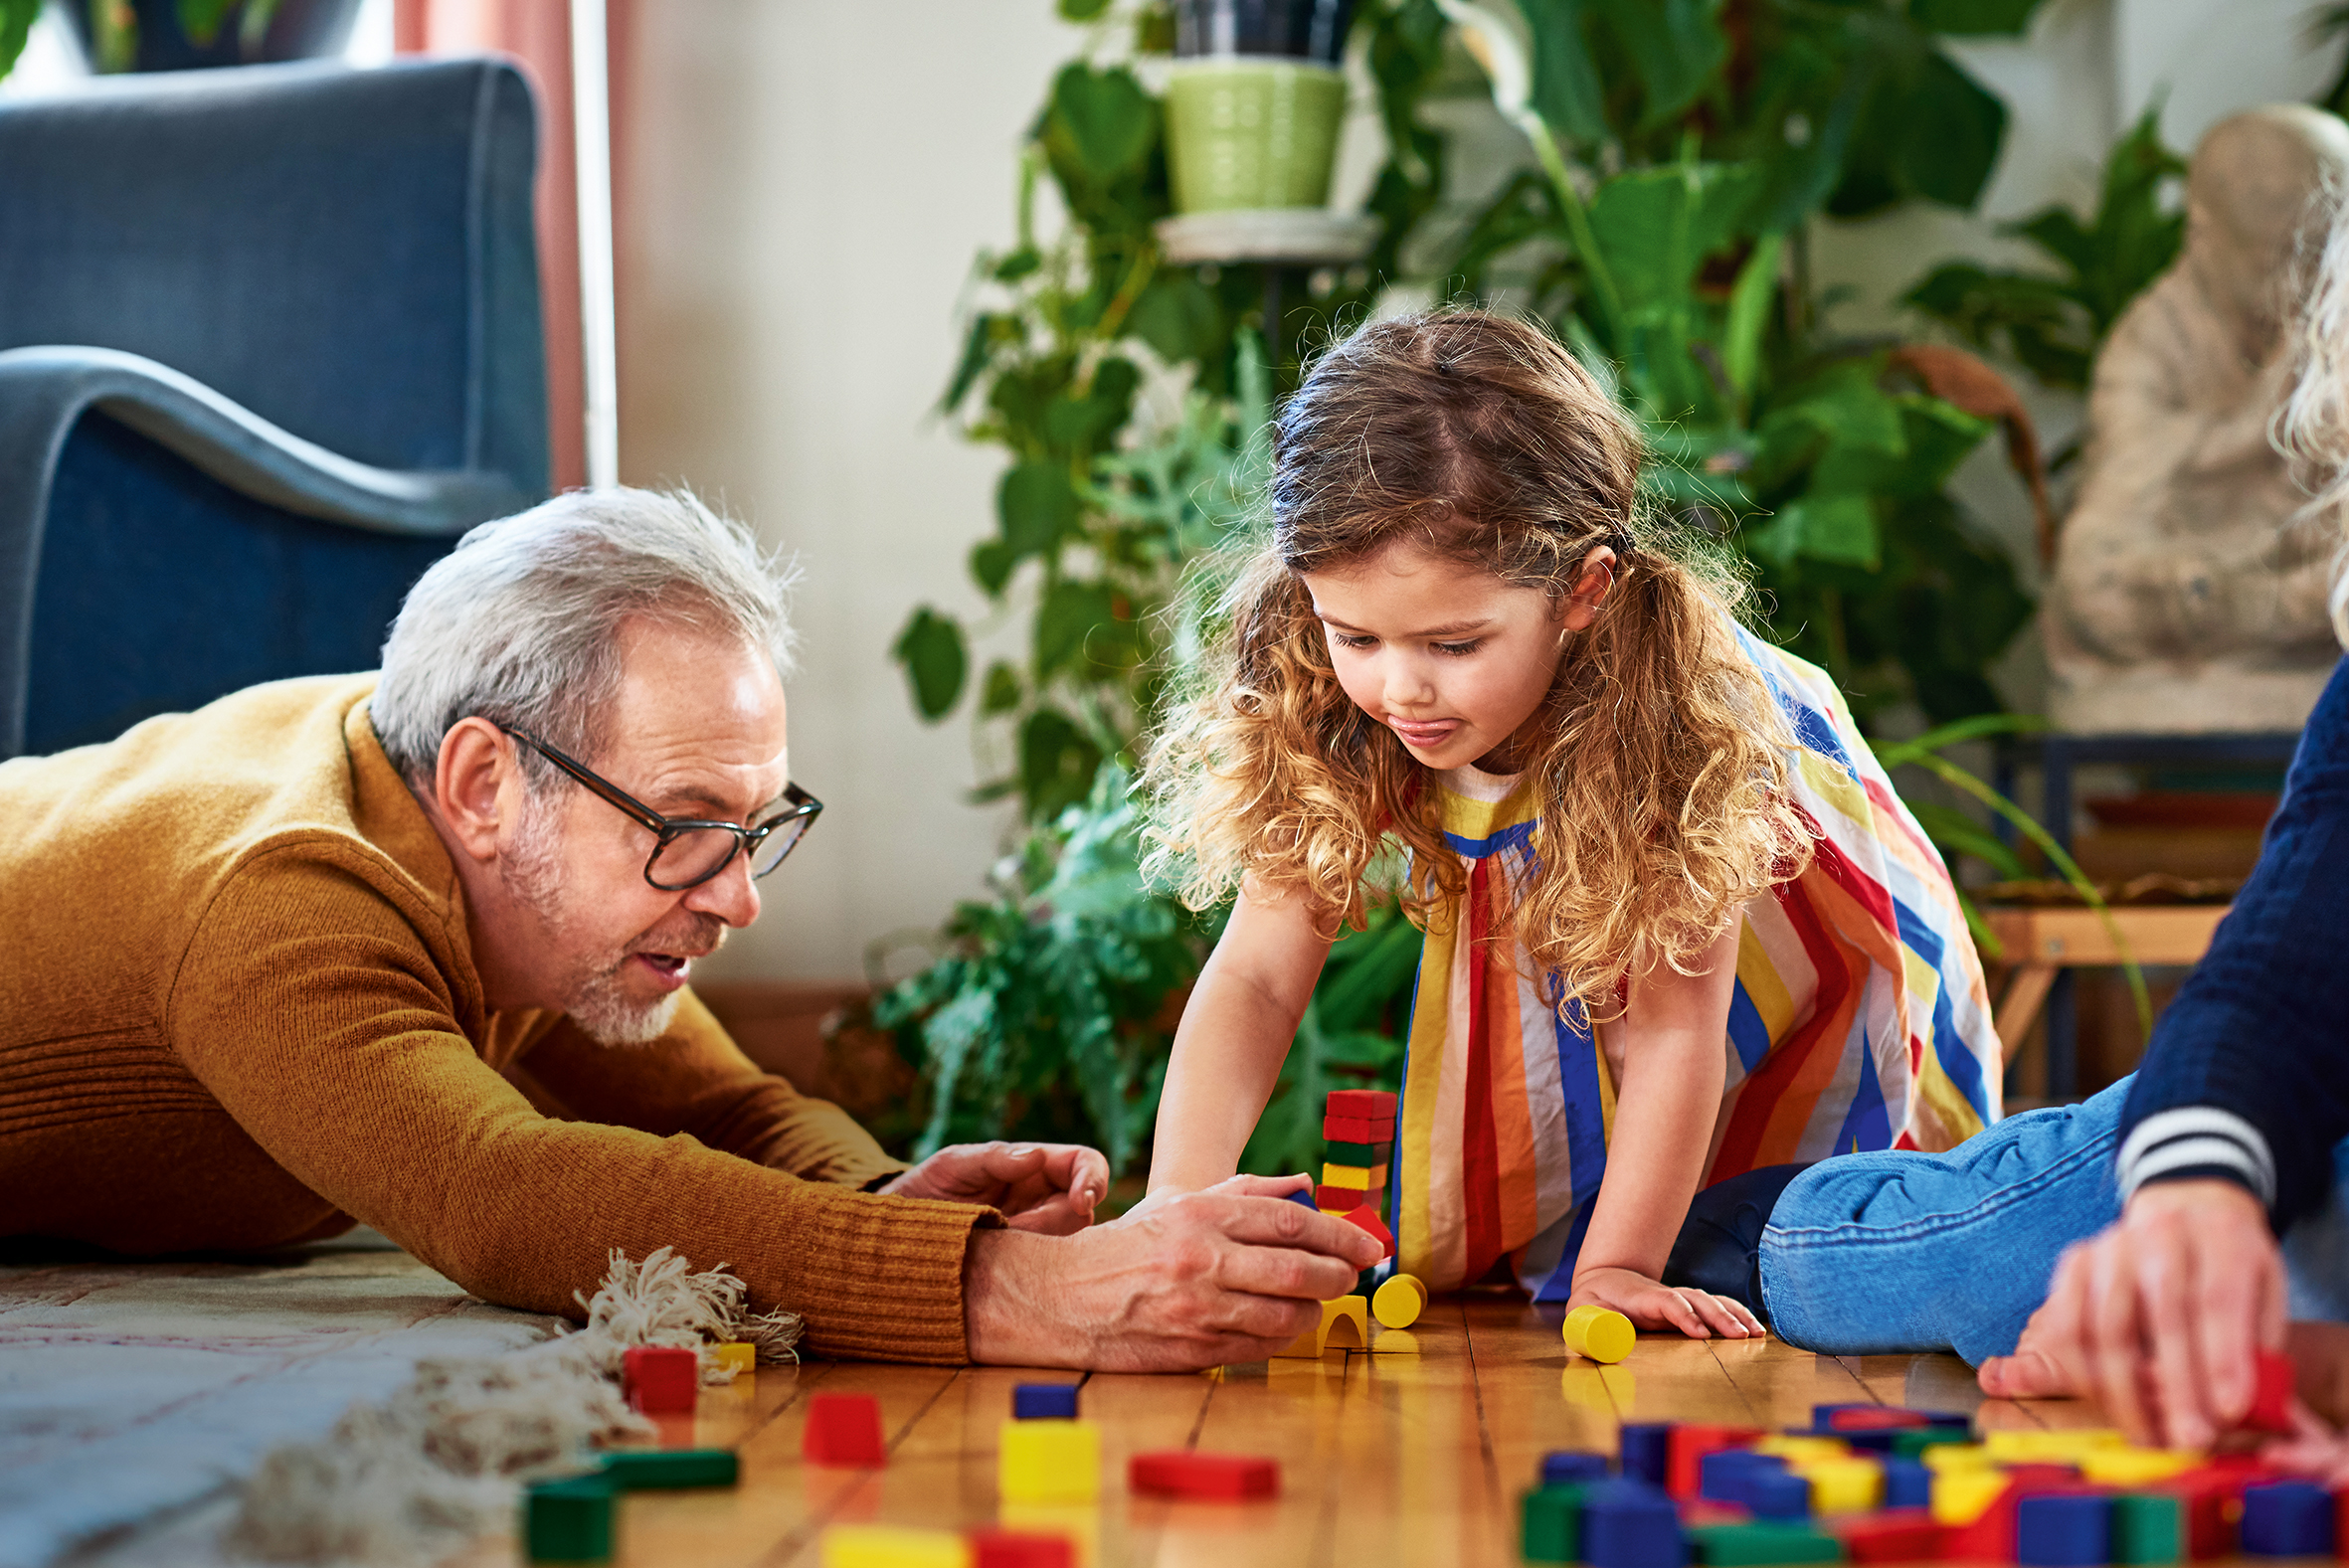 Mature man and young girl playing with wooden blocks on wooden floor, building tower, balance, care, concentration